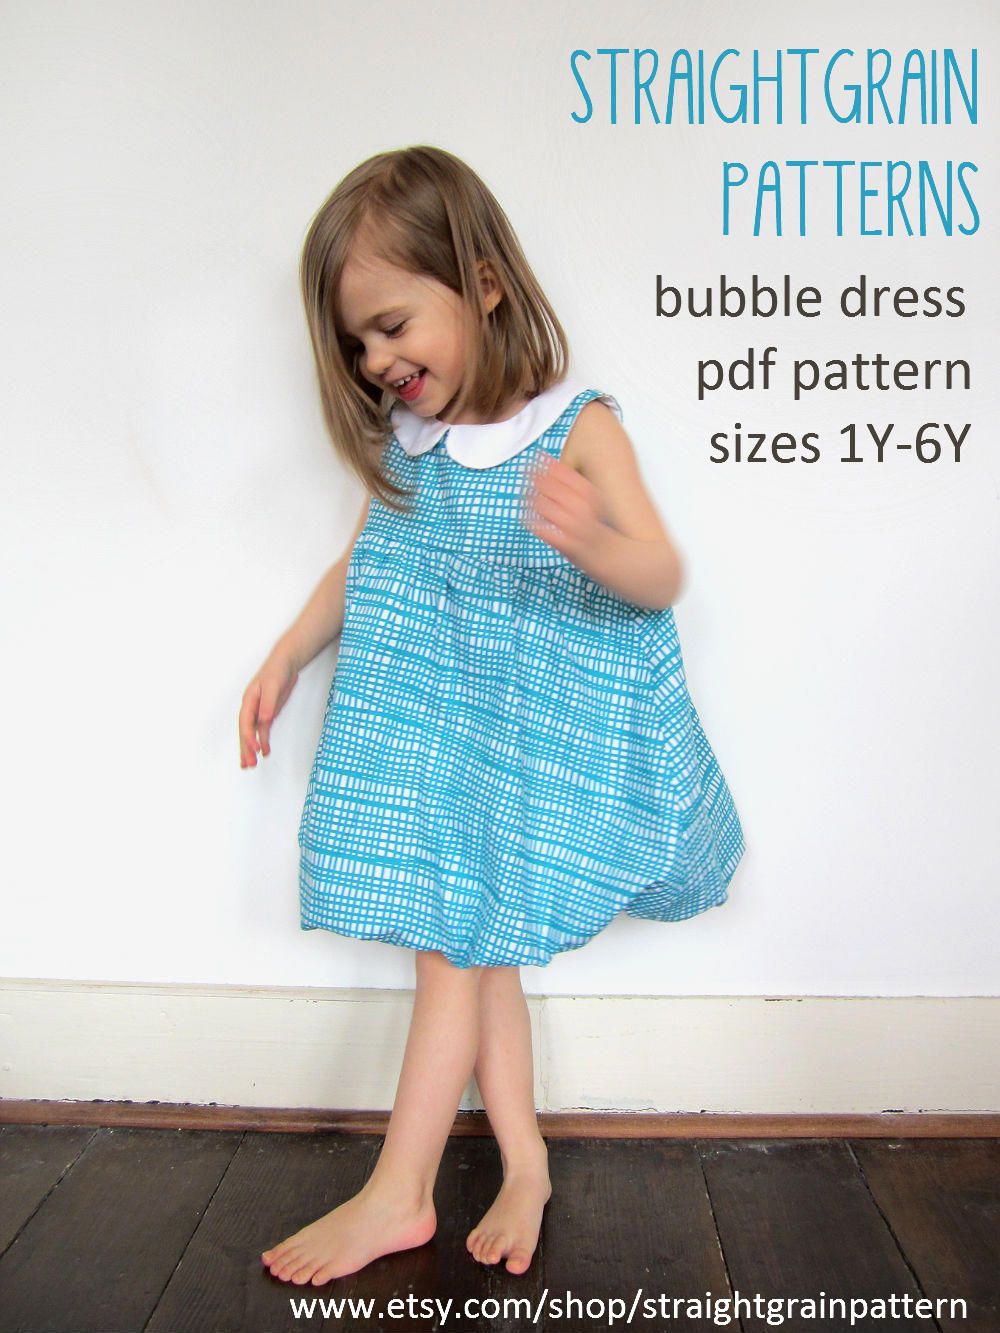 Bubble dress: patterns and tutorial